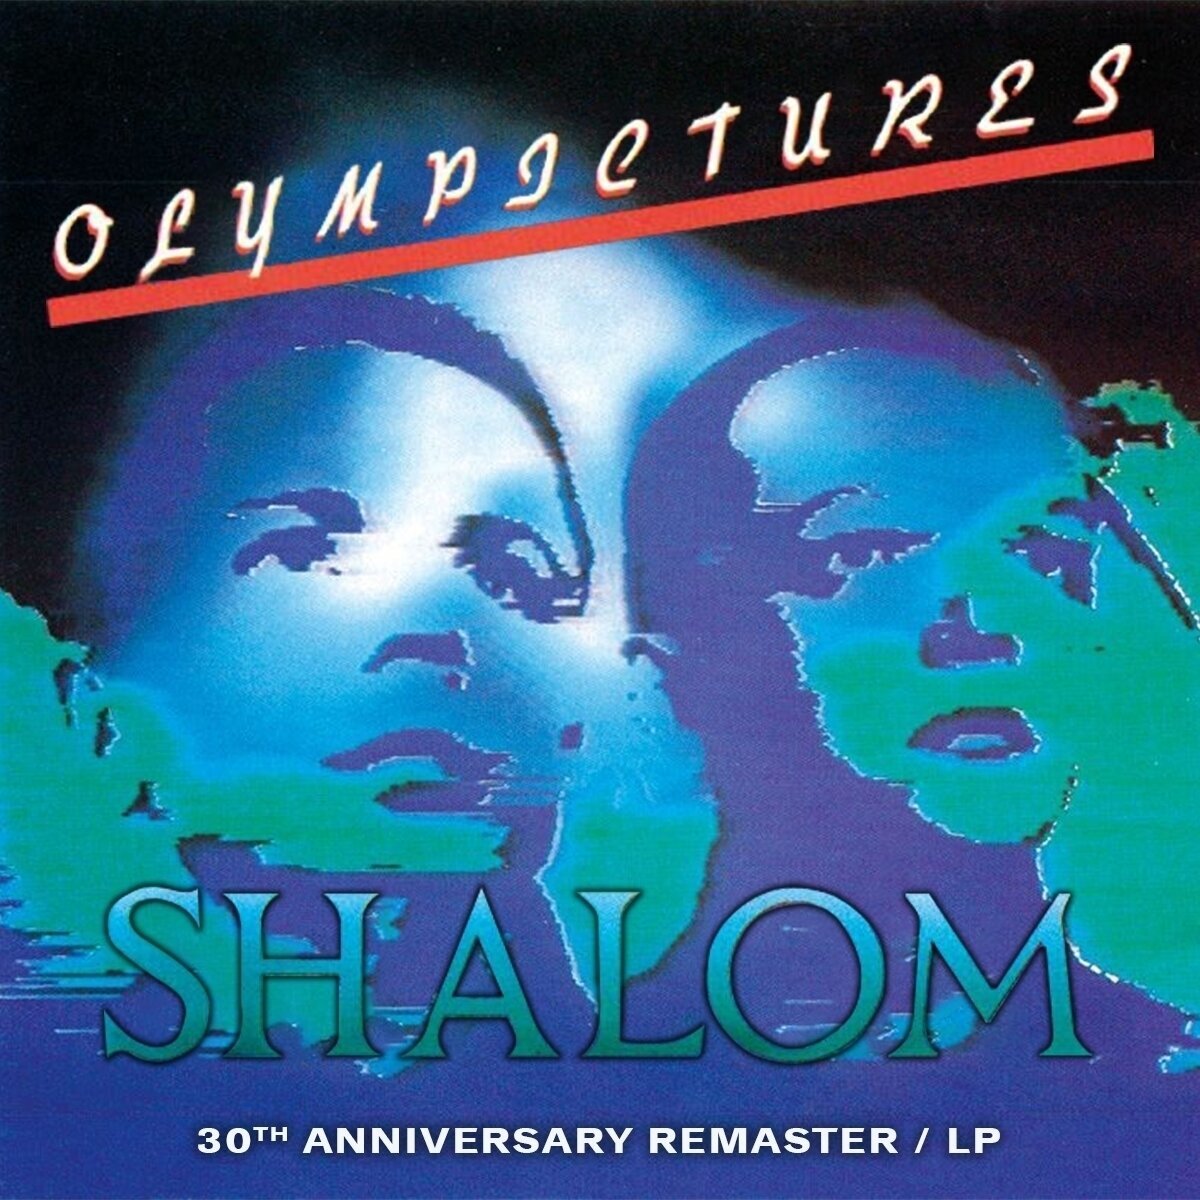 Disque vinyle Shalom - Olympictures (30th Anniversary) (Remastered) (LP)